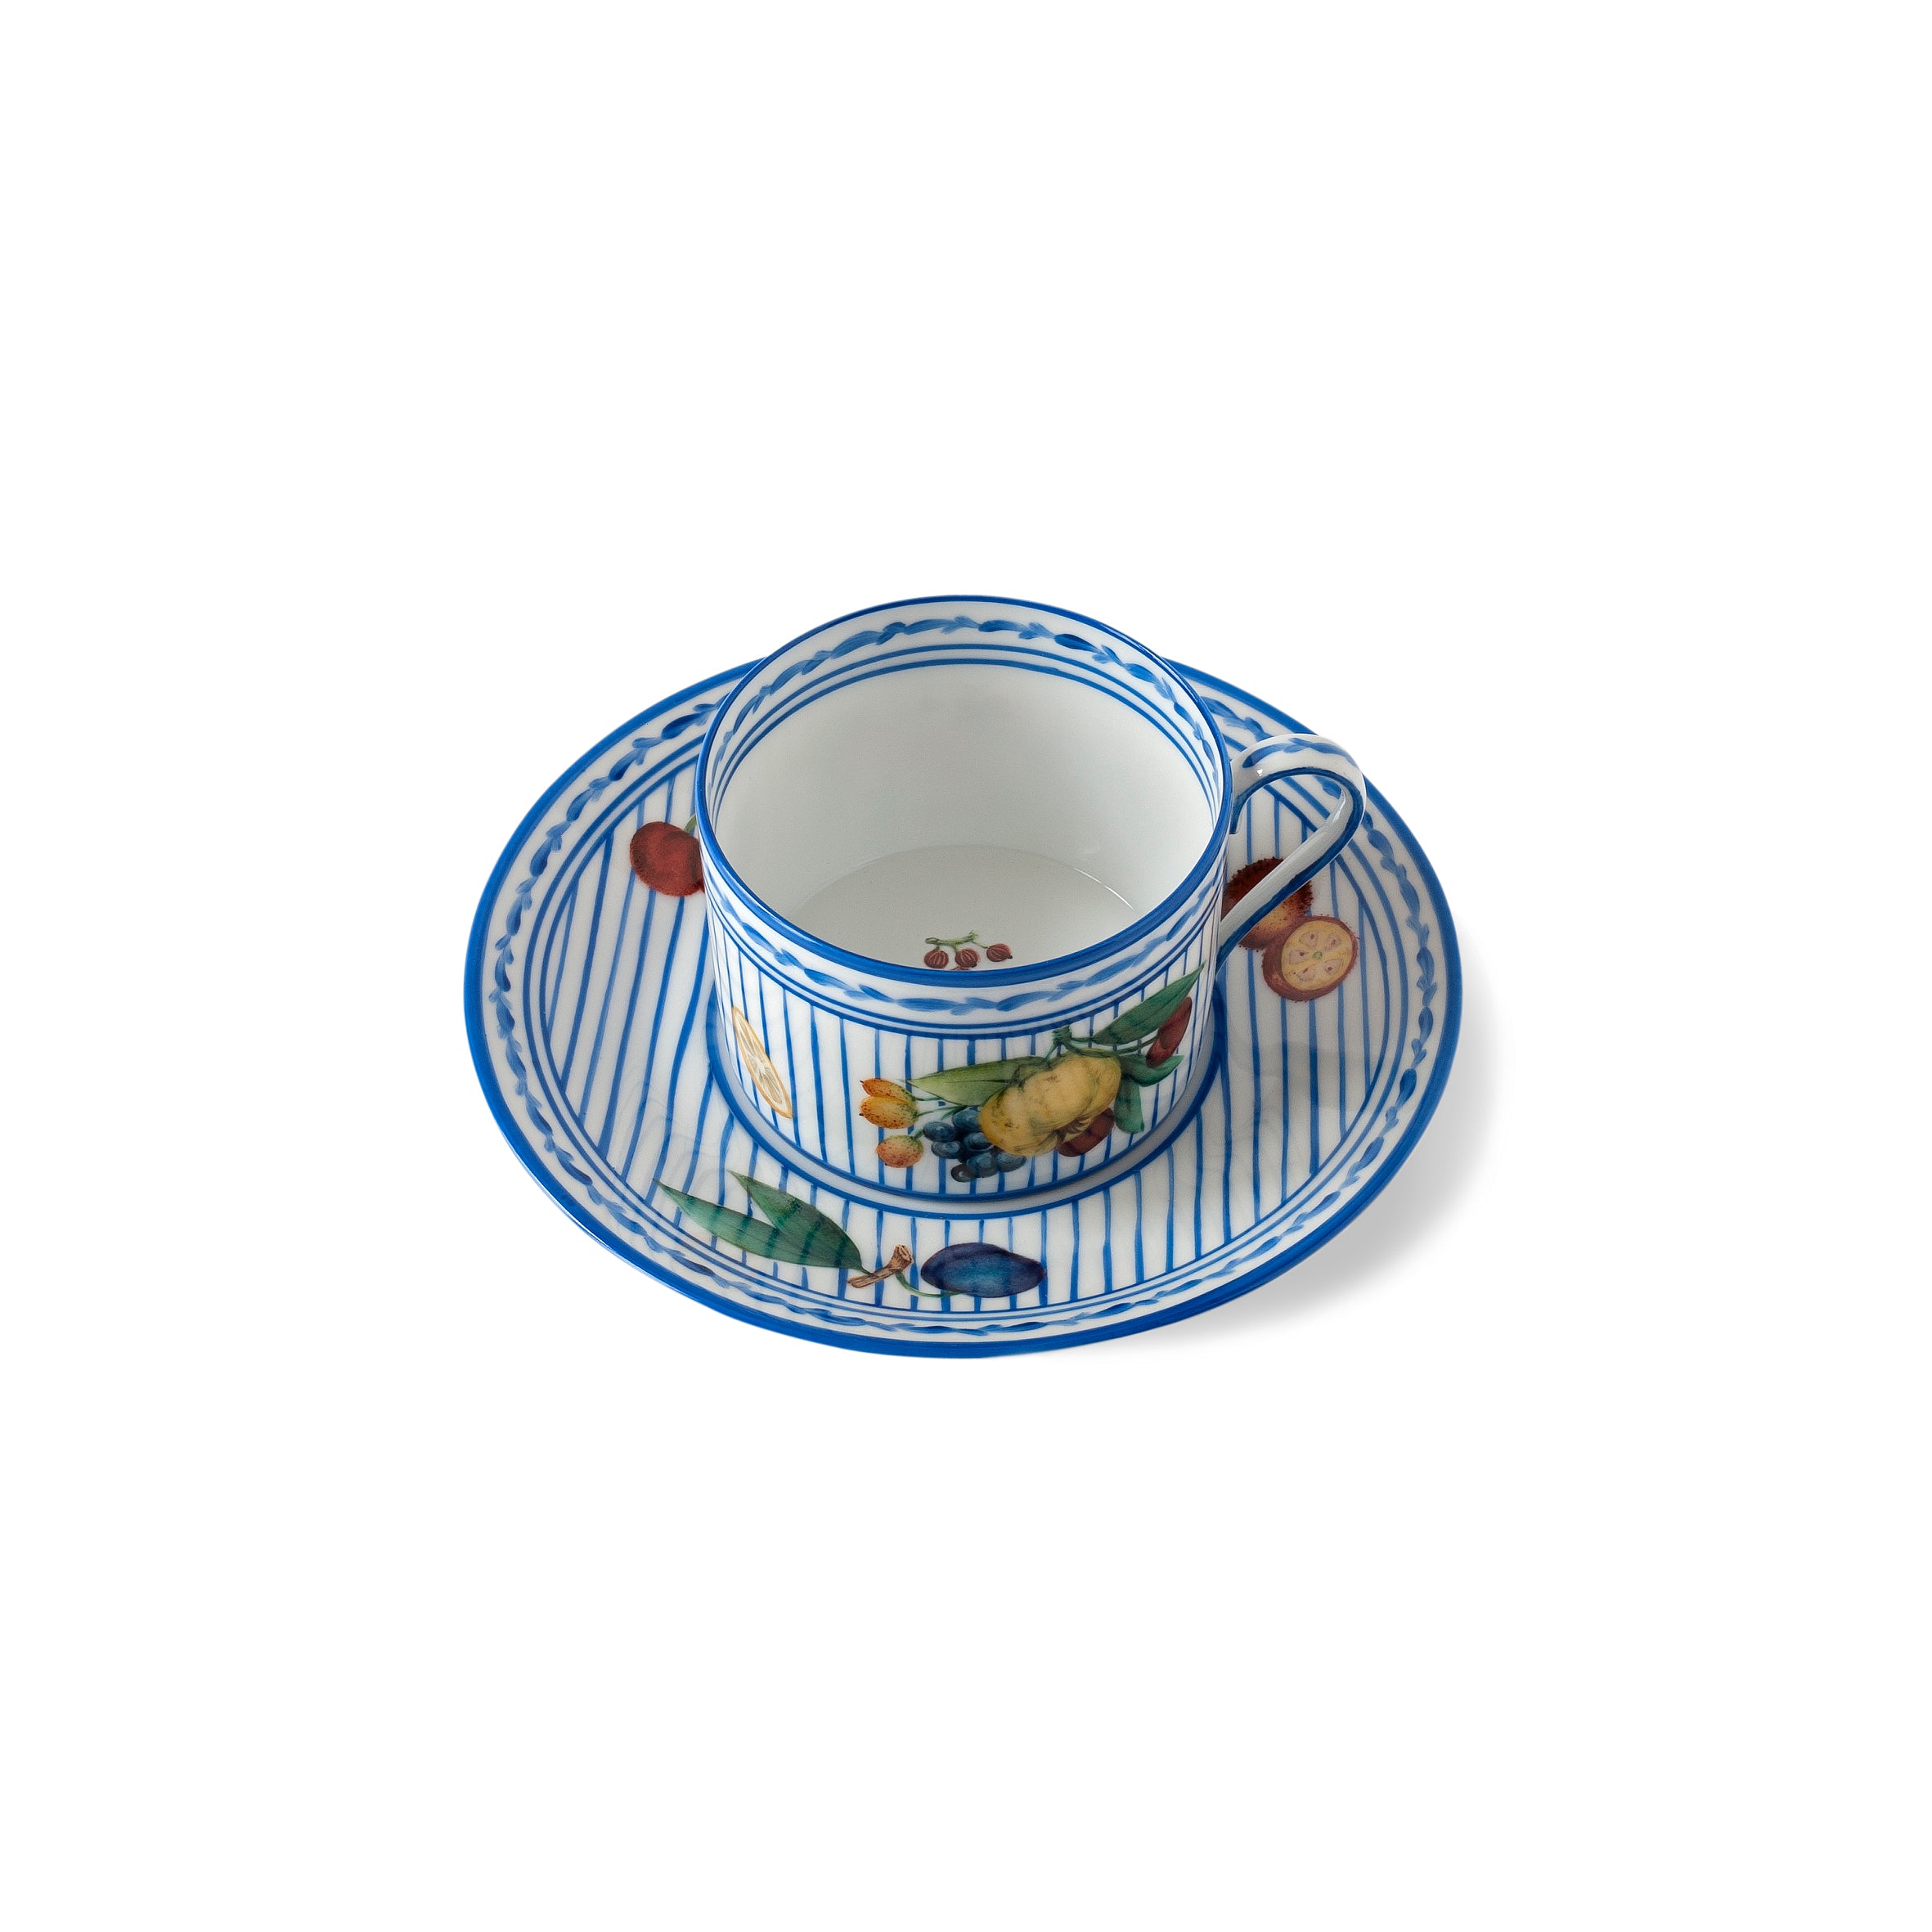 Potager in Blue - Tea cup and saucer
